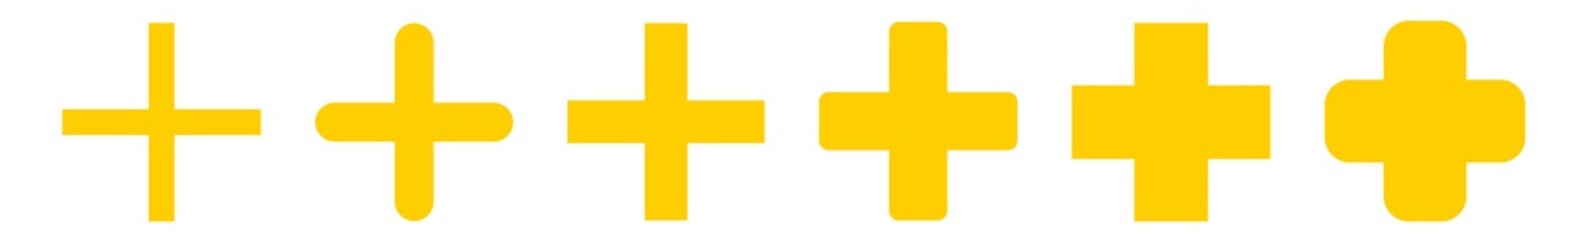 Plus Icon Yellow | Pluses | Cross Symbol | Addition Logo | Positive Sign | Isolated | Variations